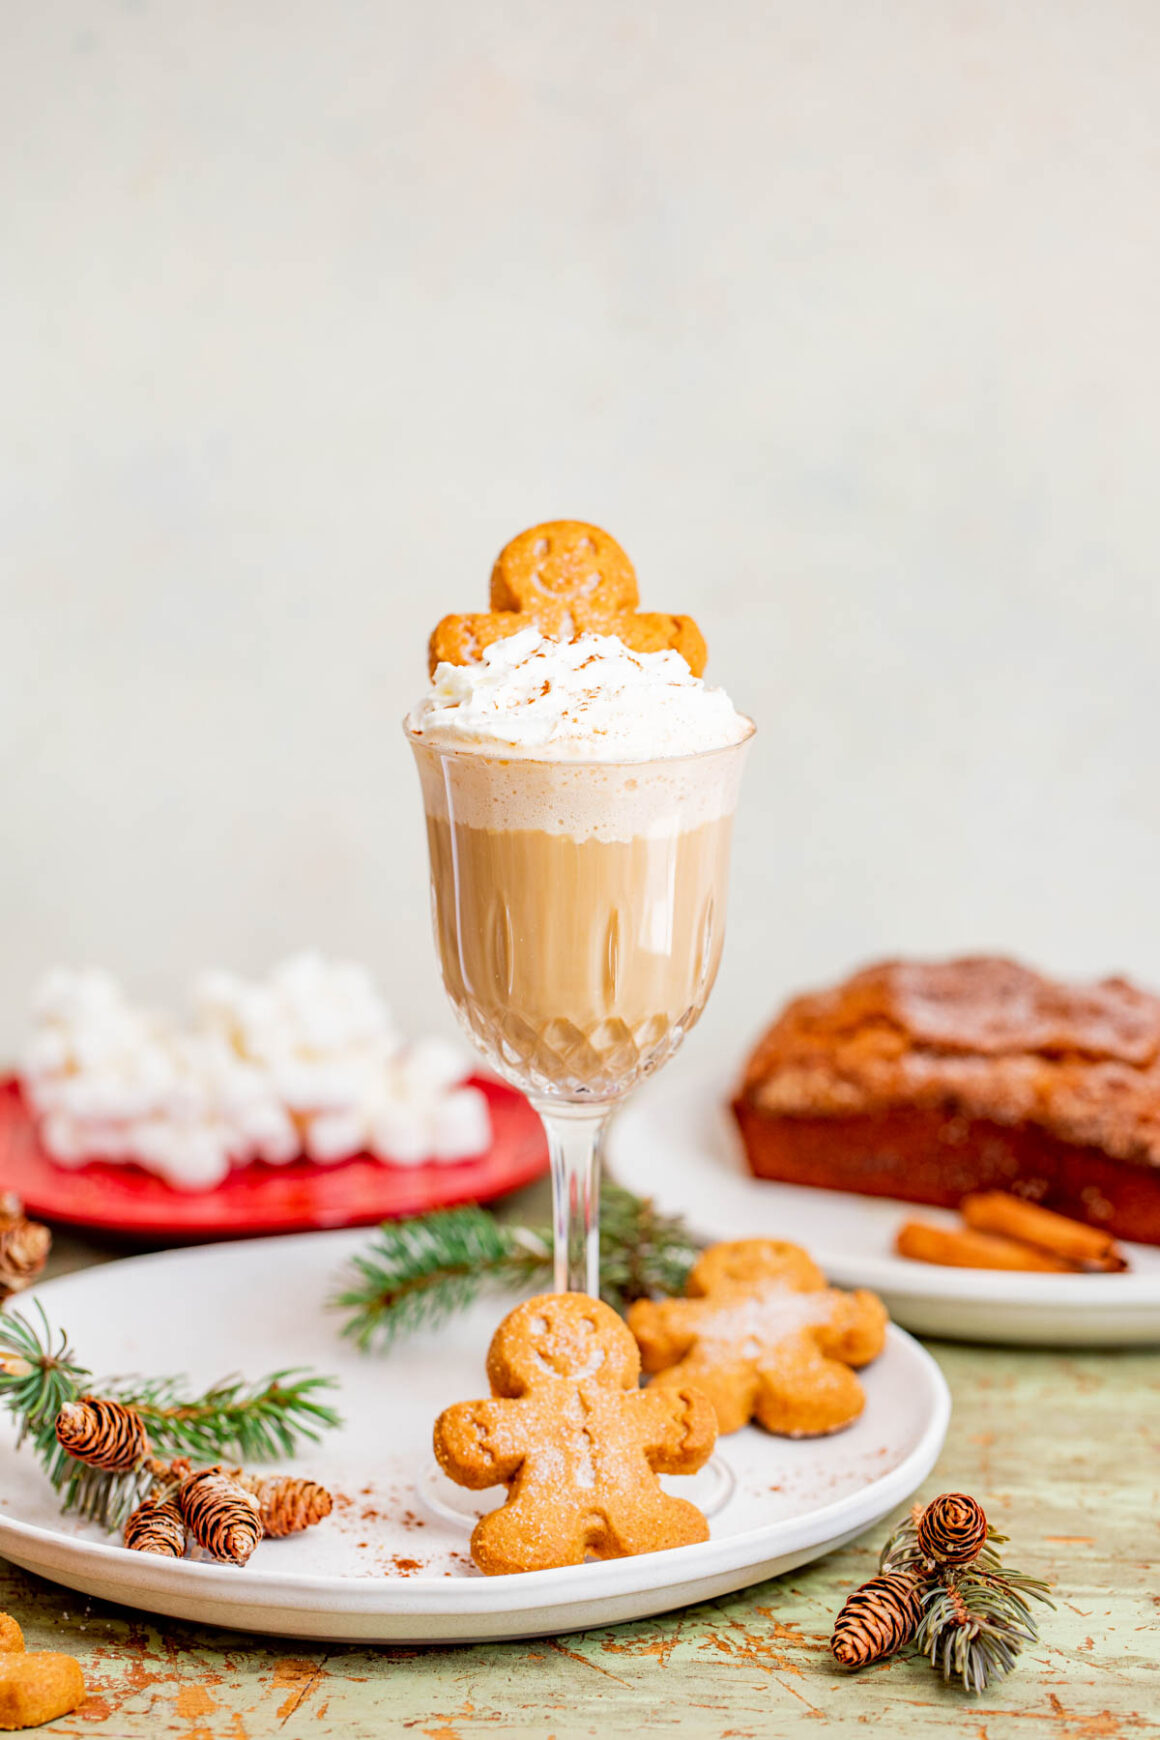 The base of the ginger latte is a rich gingerbread syrup, which adds a sweet and spicy touch to the drink.